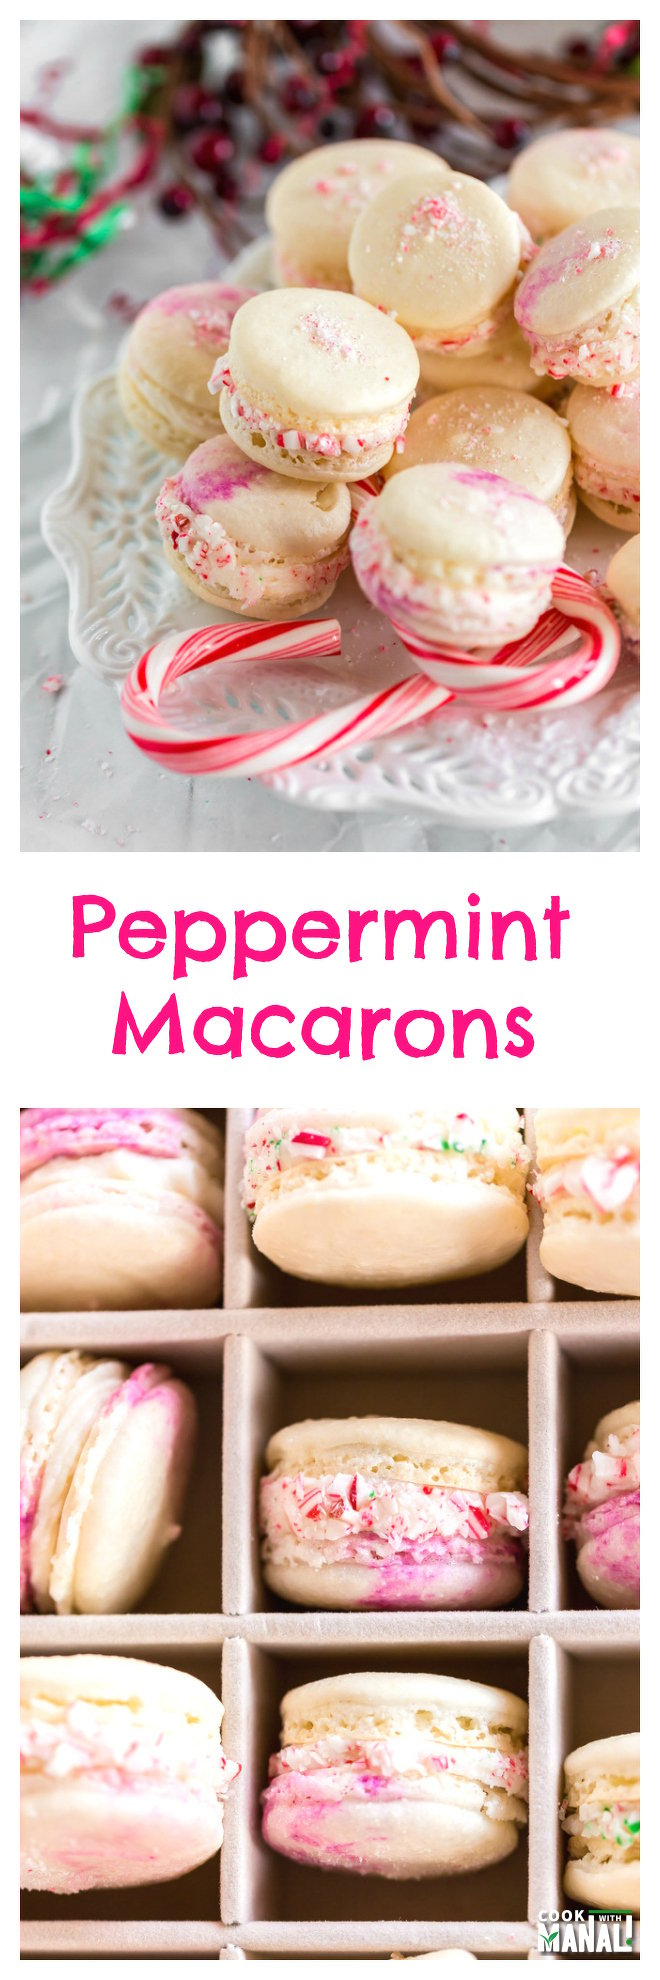 Peppermint Macarons Collage